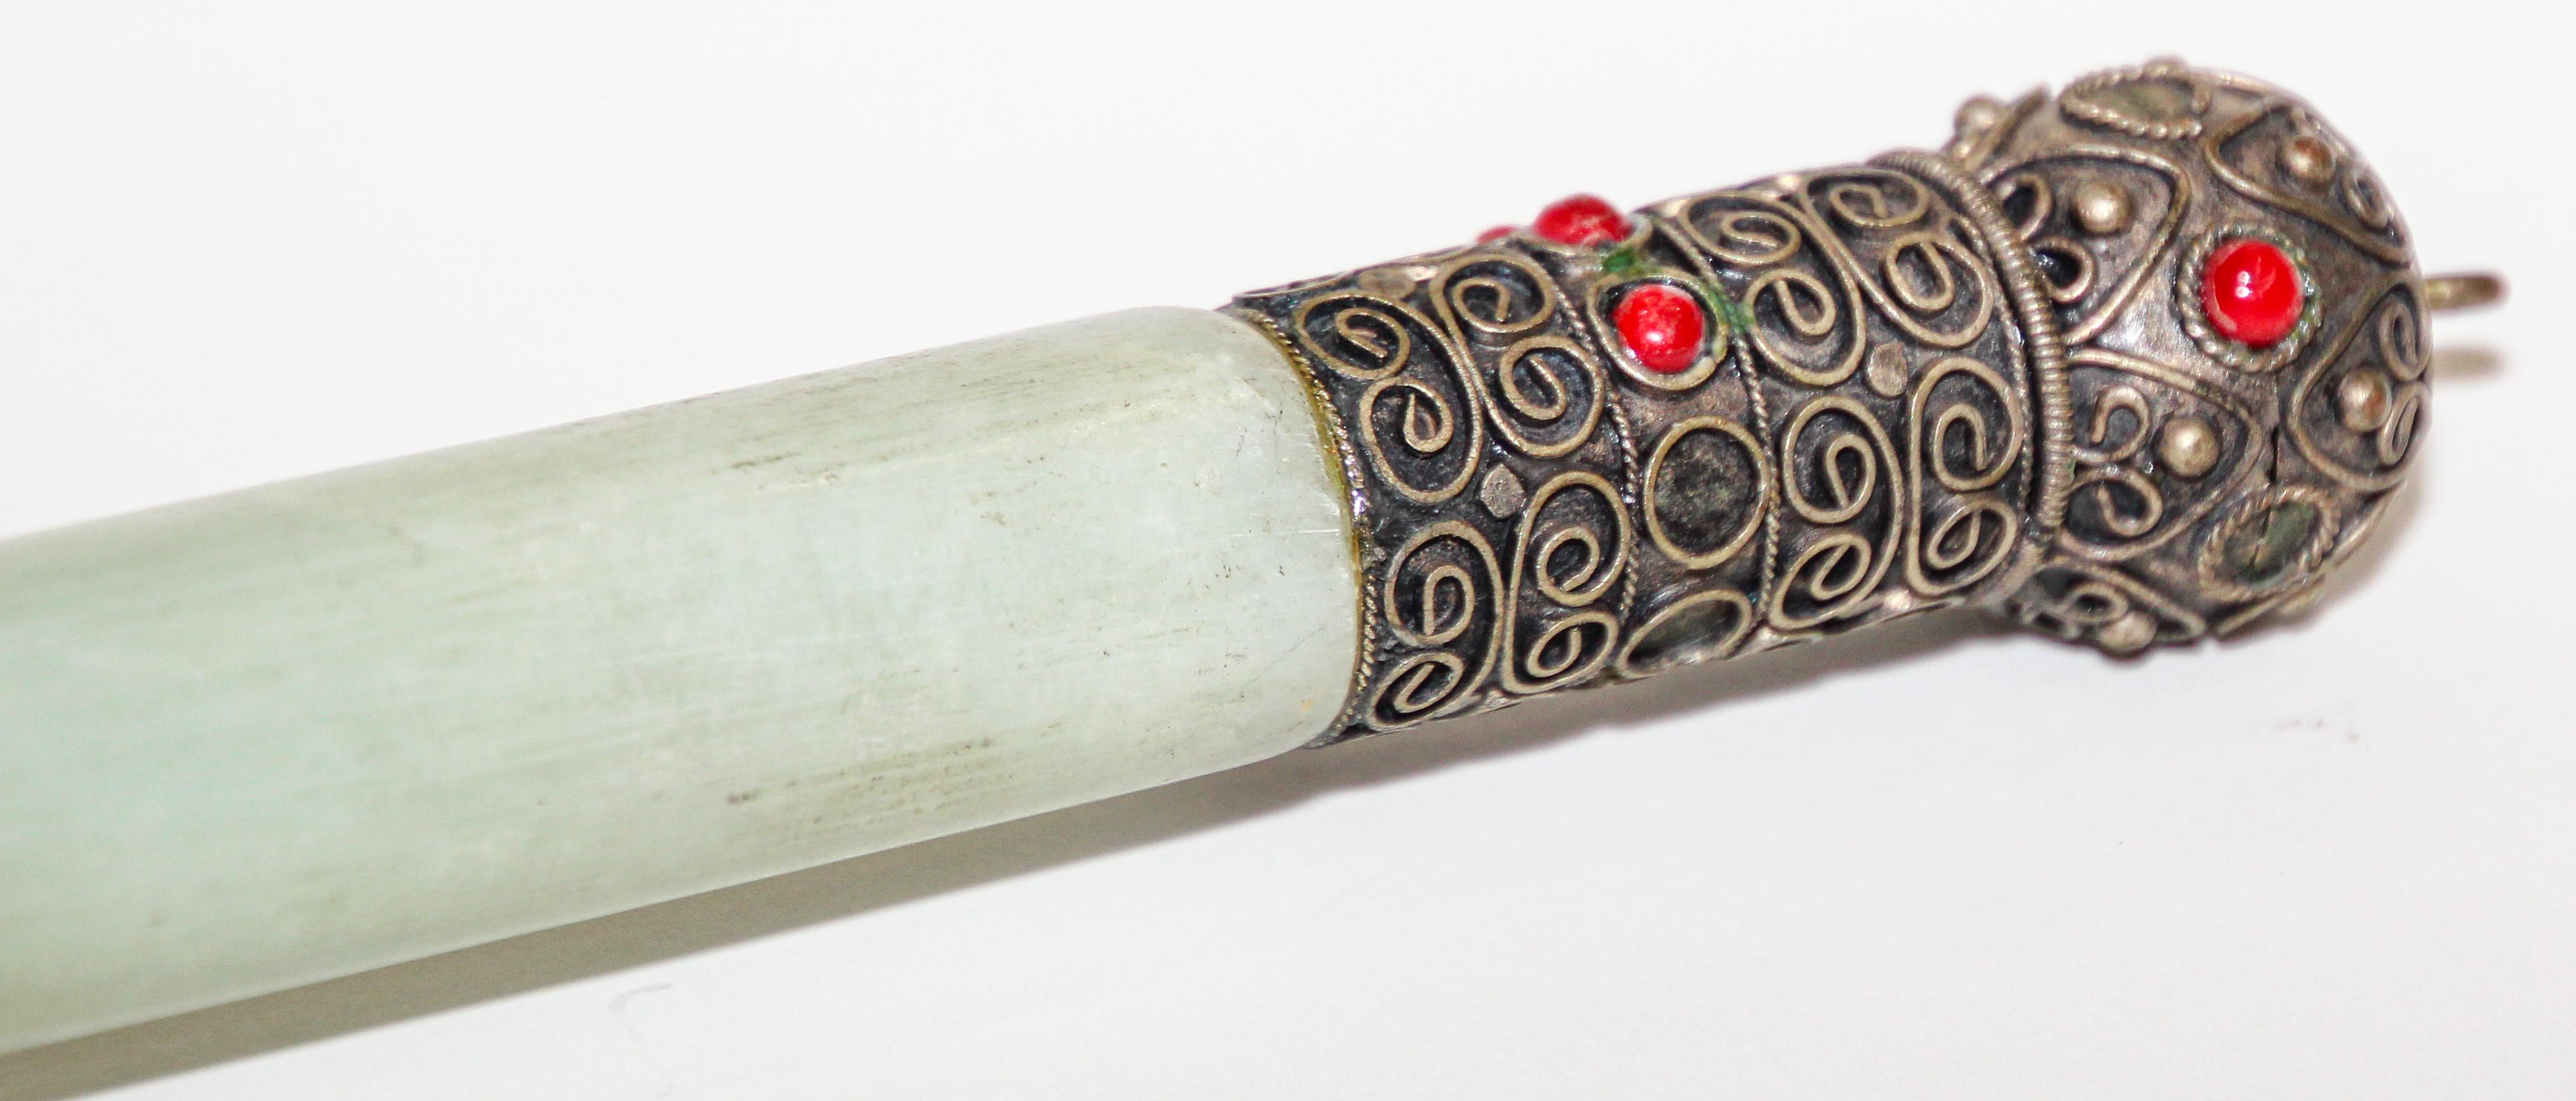 Hand-Crafted Chinese Calligraphy Brush Large Jade Green with Silver and Stones Decor